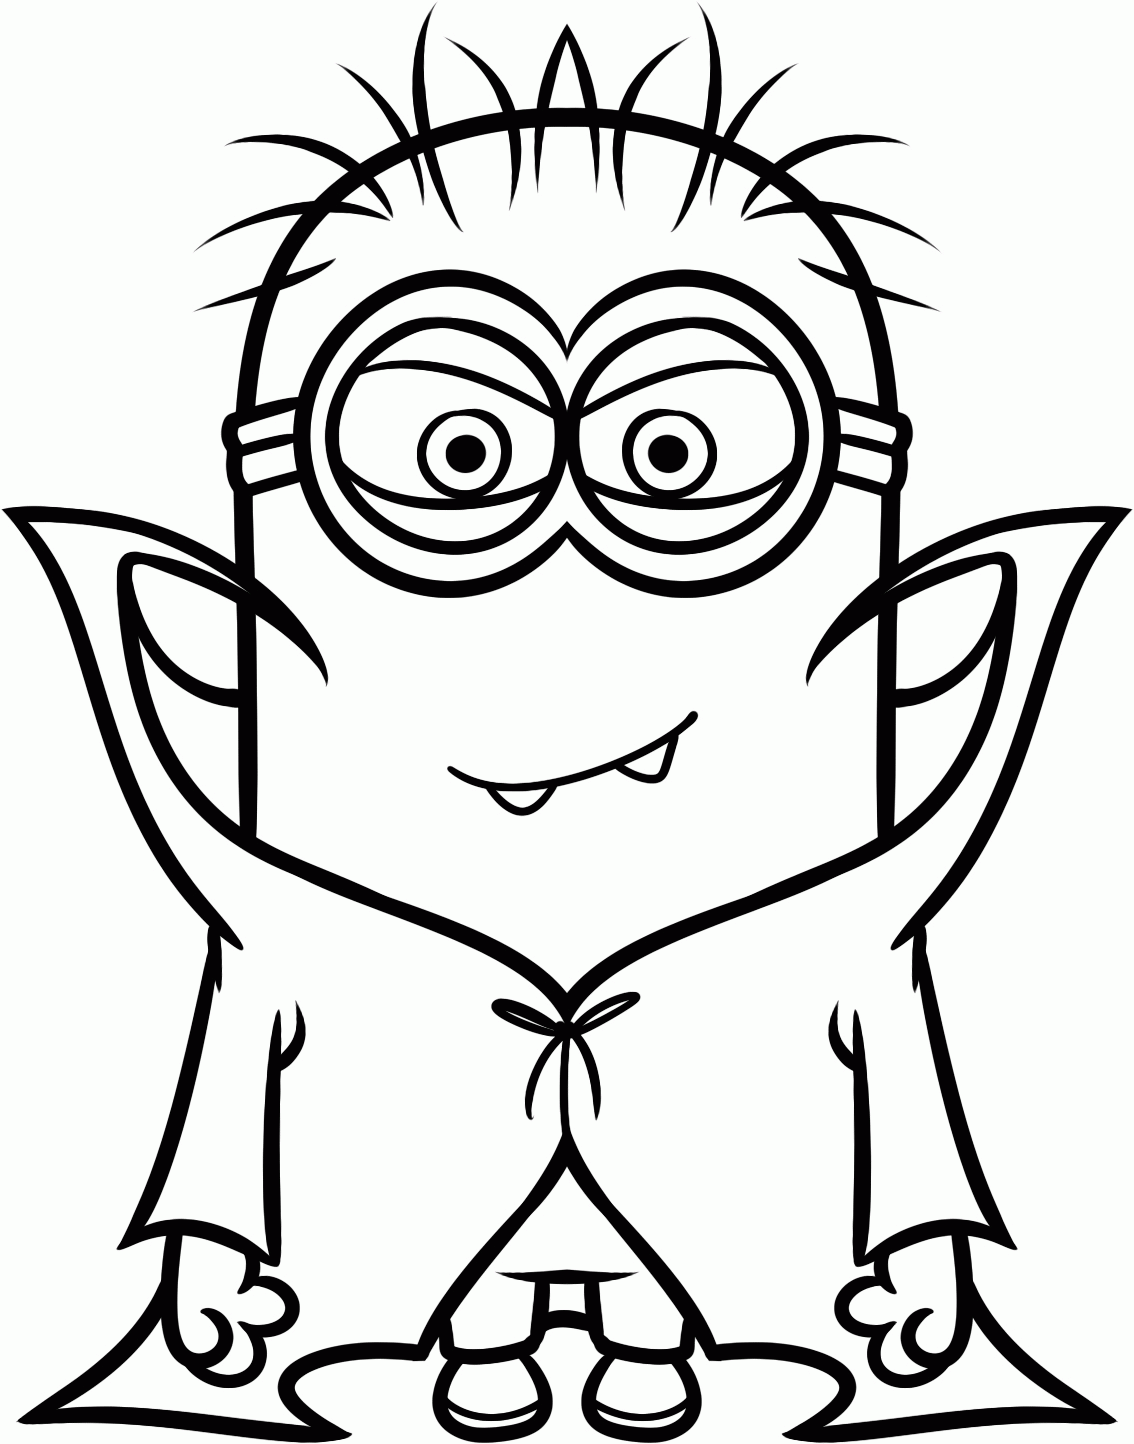 To print minion coloring pages from “Despicable Me” for free